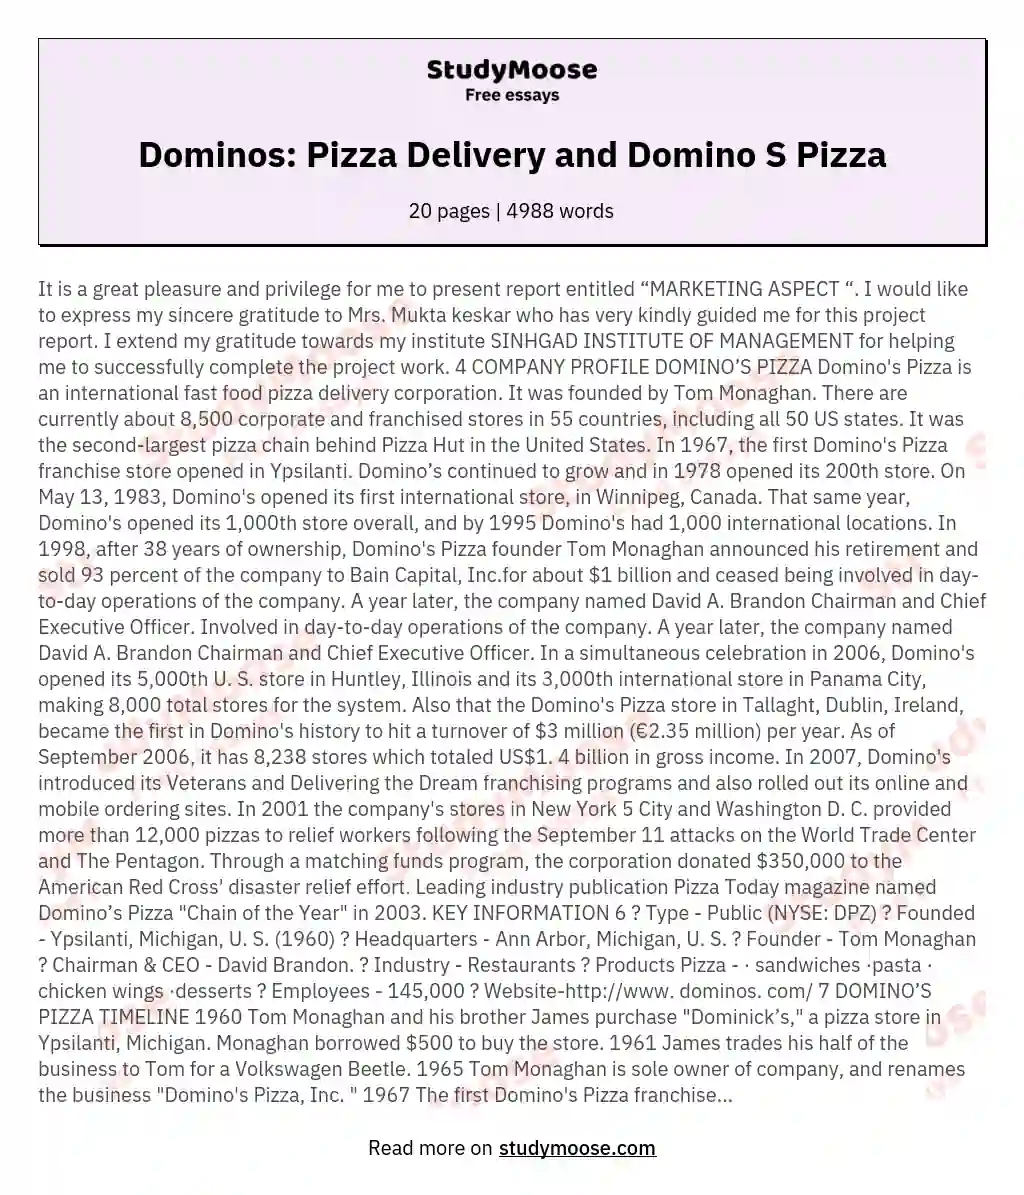 Dominos: Pizza Delivery and Domino S Pizza